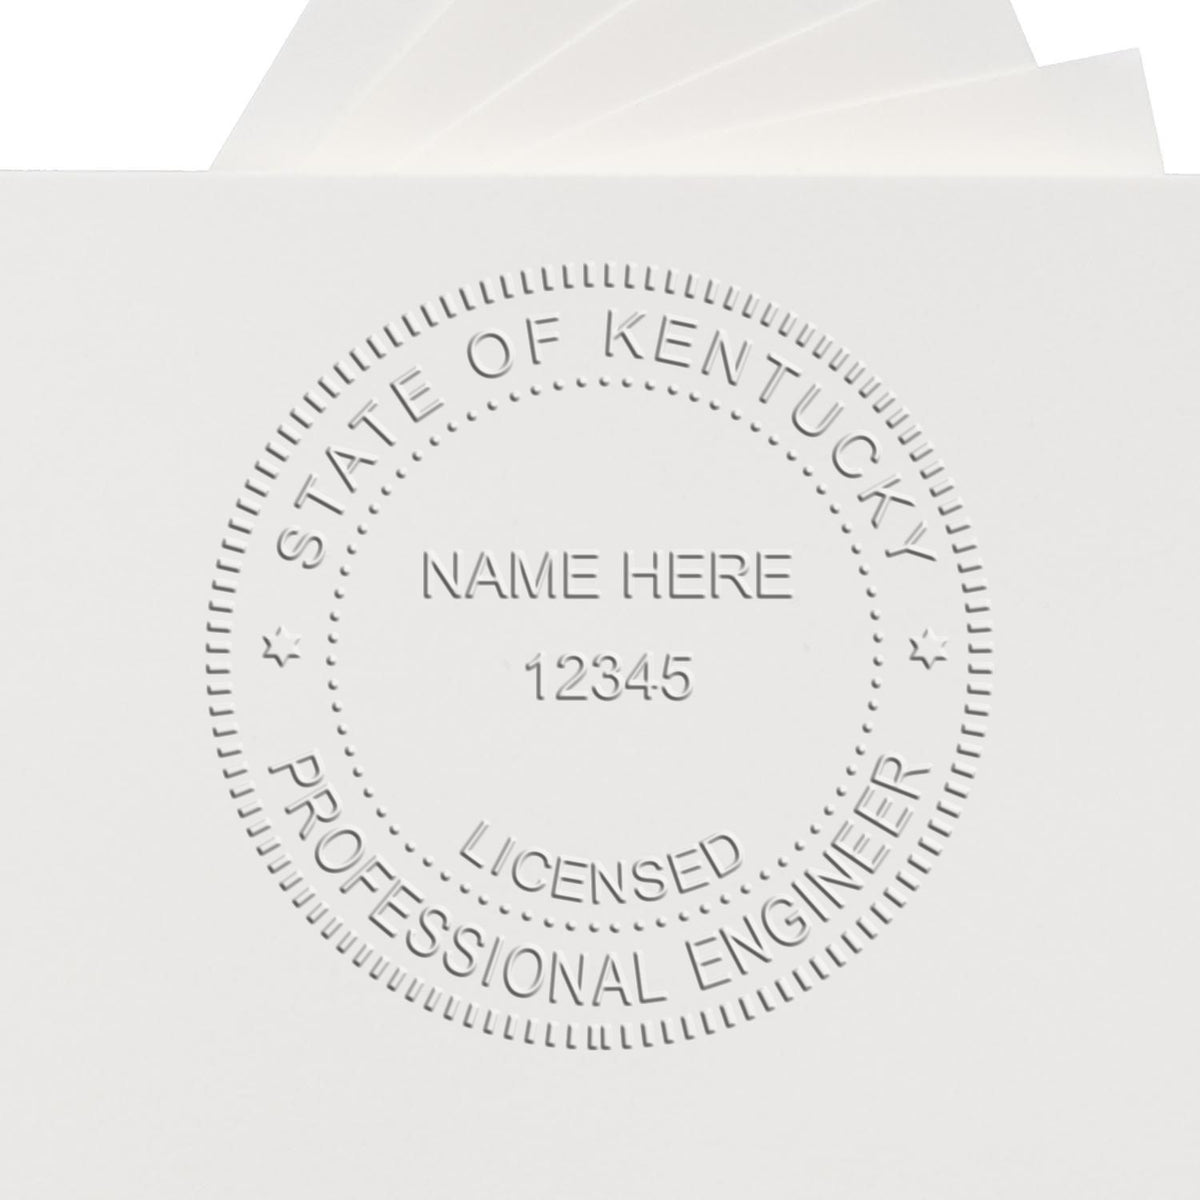 The Heavy Duty Cast Iron Kentucky Engineer Seal Embosser stamp impression comes to life with a crisp, detailed photo on paper - showcasing true professional quality.